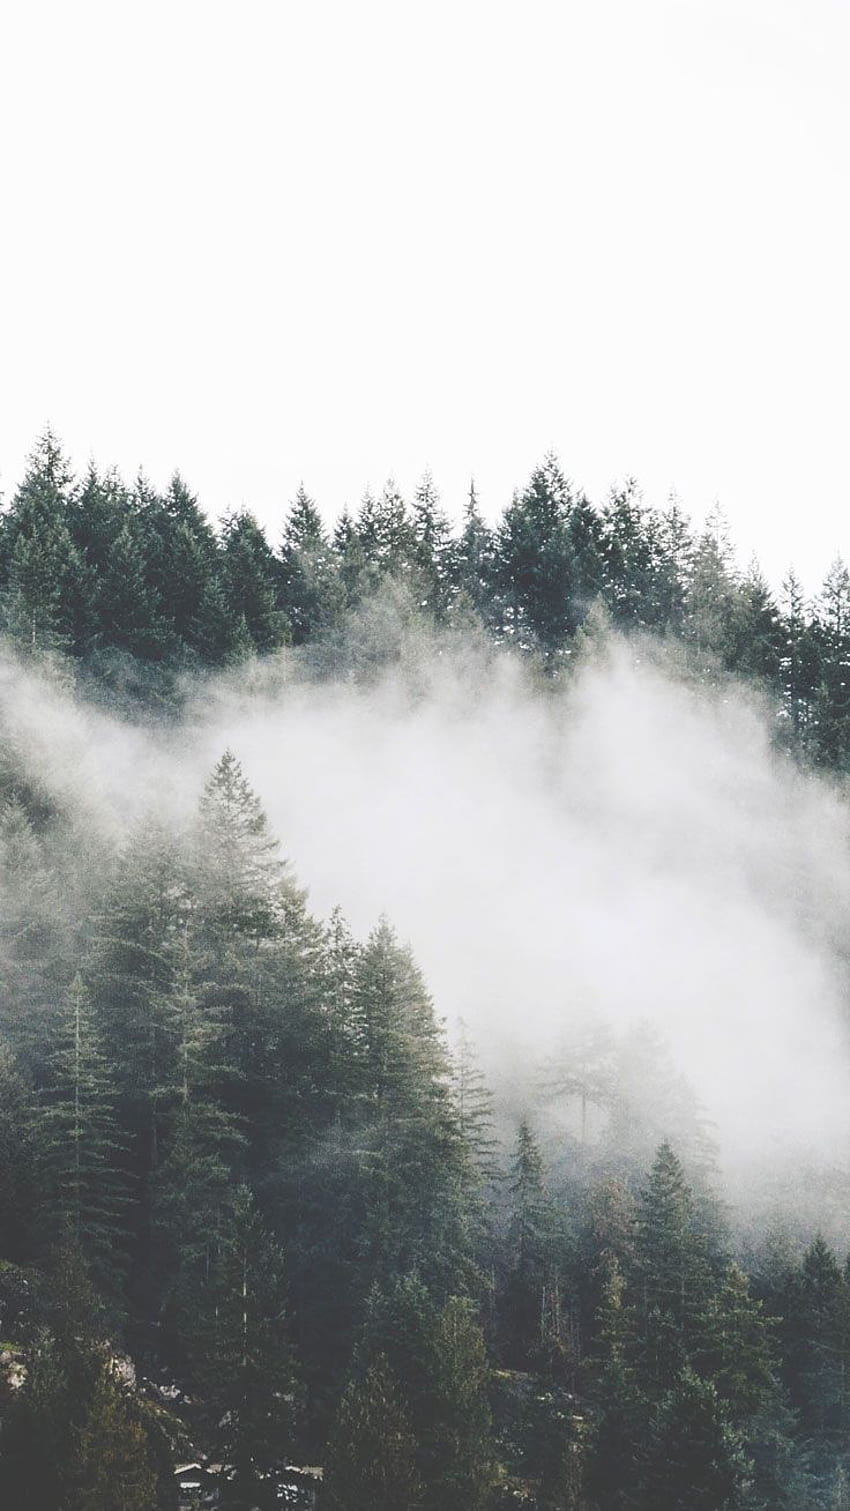 A foggy forest with pine trees on a hillside. - Foggy forest, nature, forest, fog